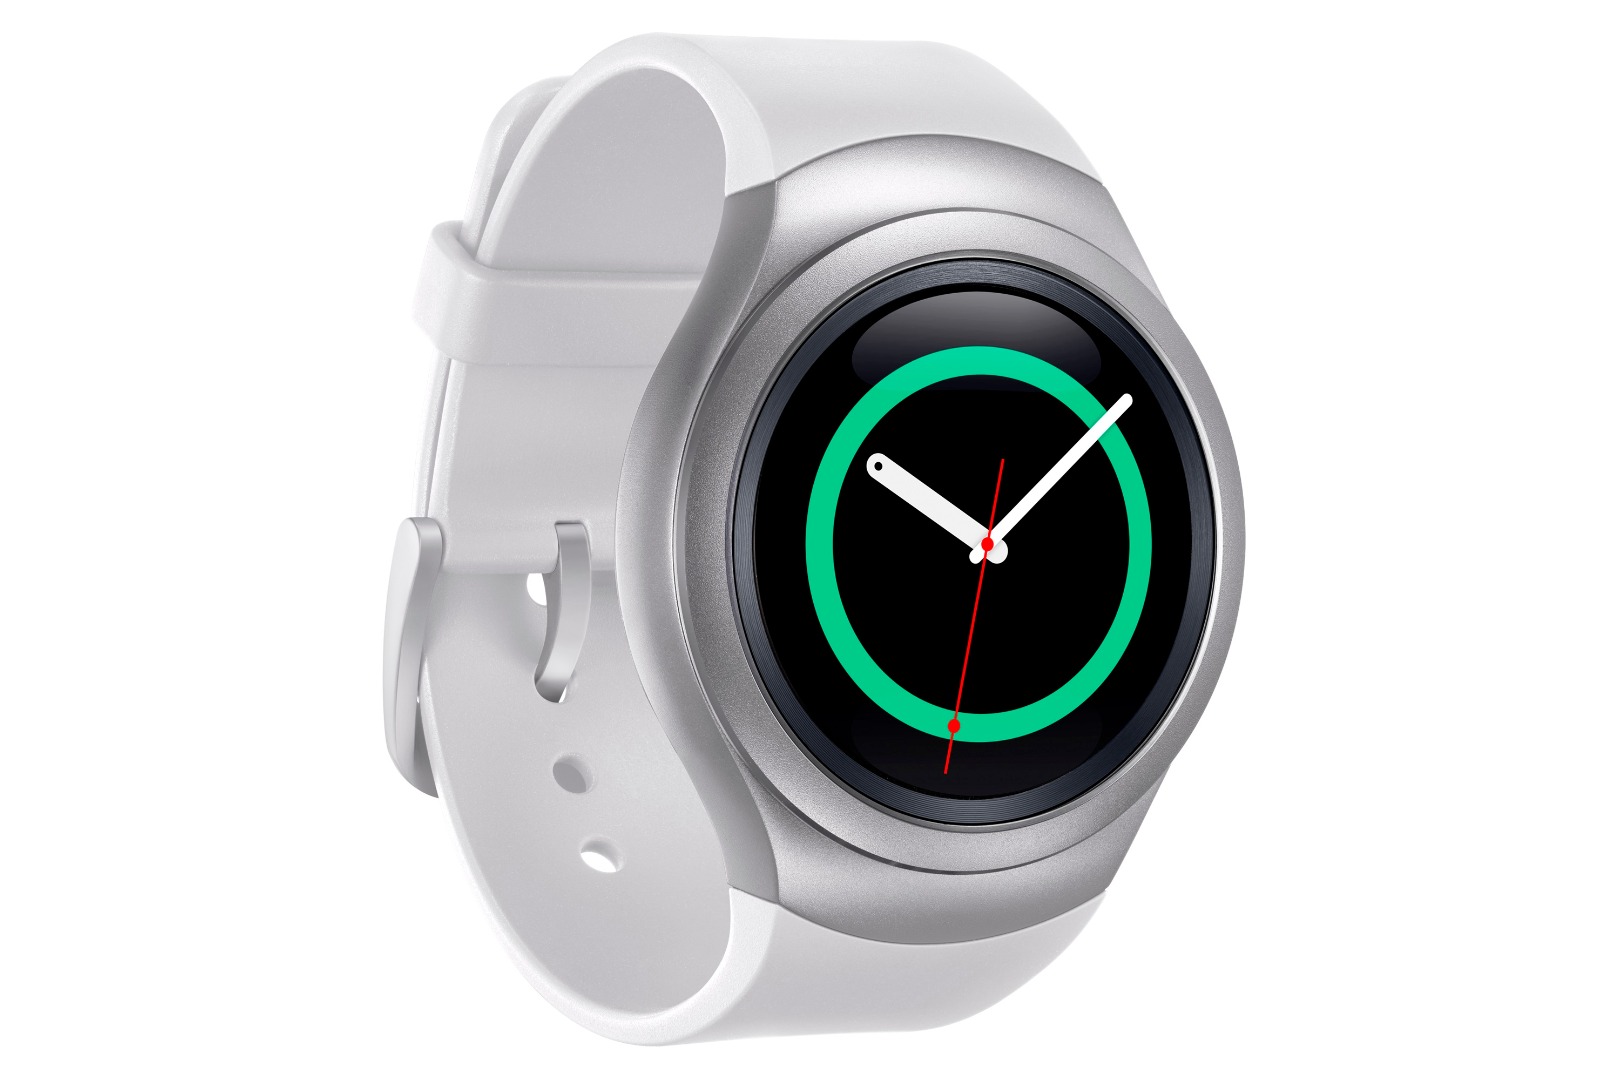 Samsung Gear S2, Gear S2 classic out in Singapore in October - Techgoondu